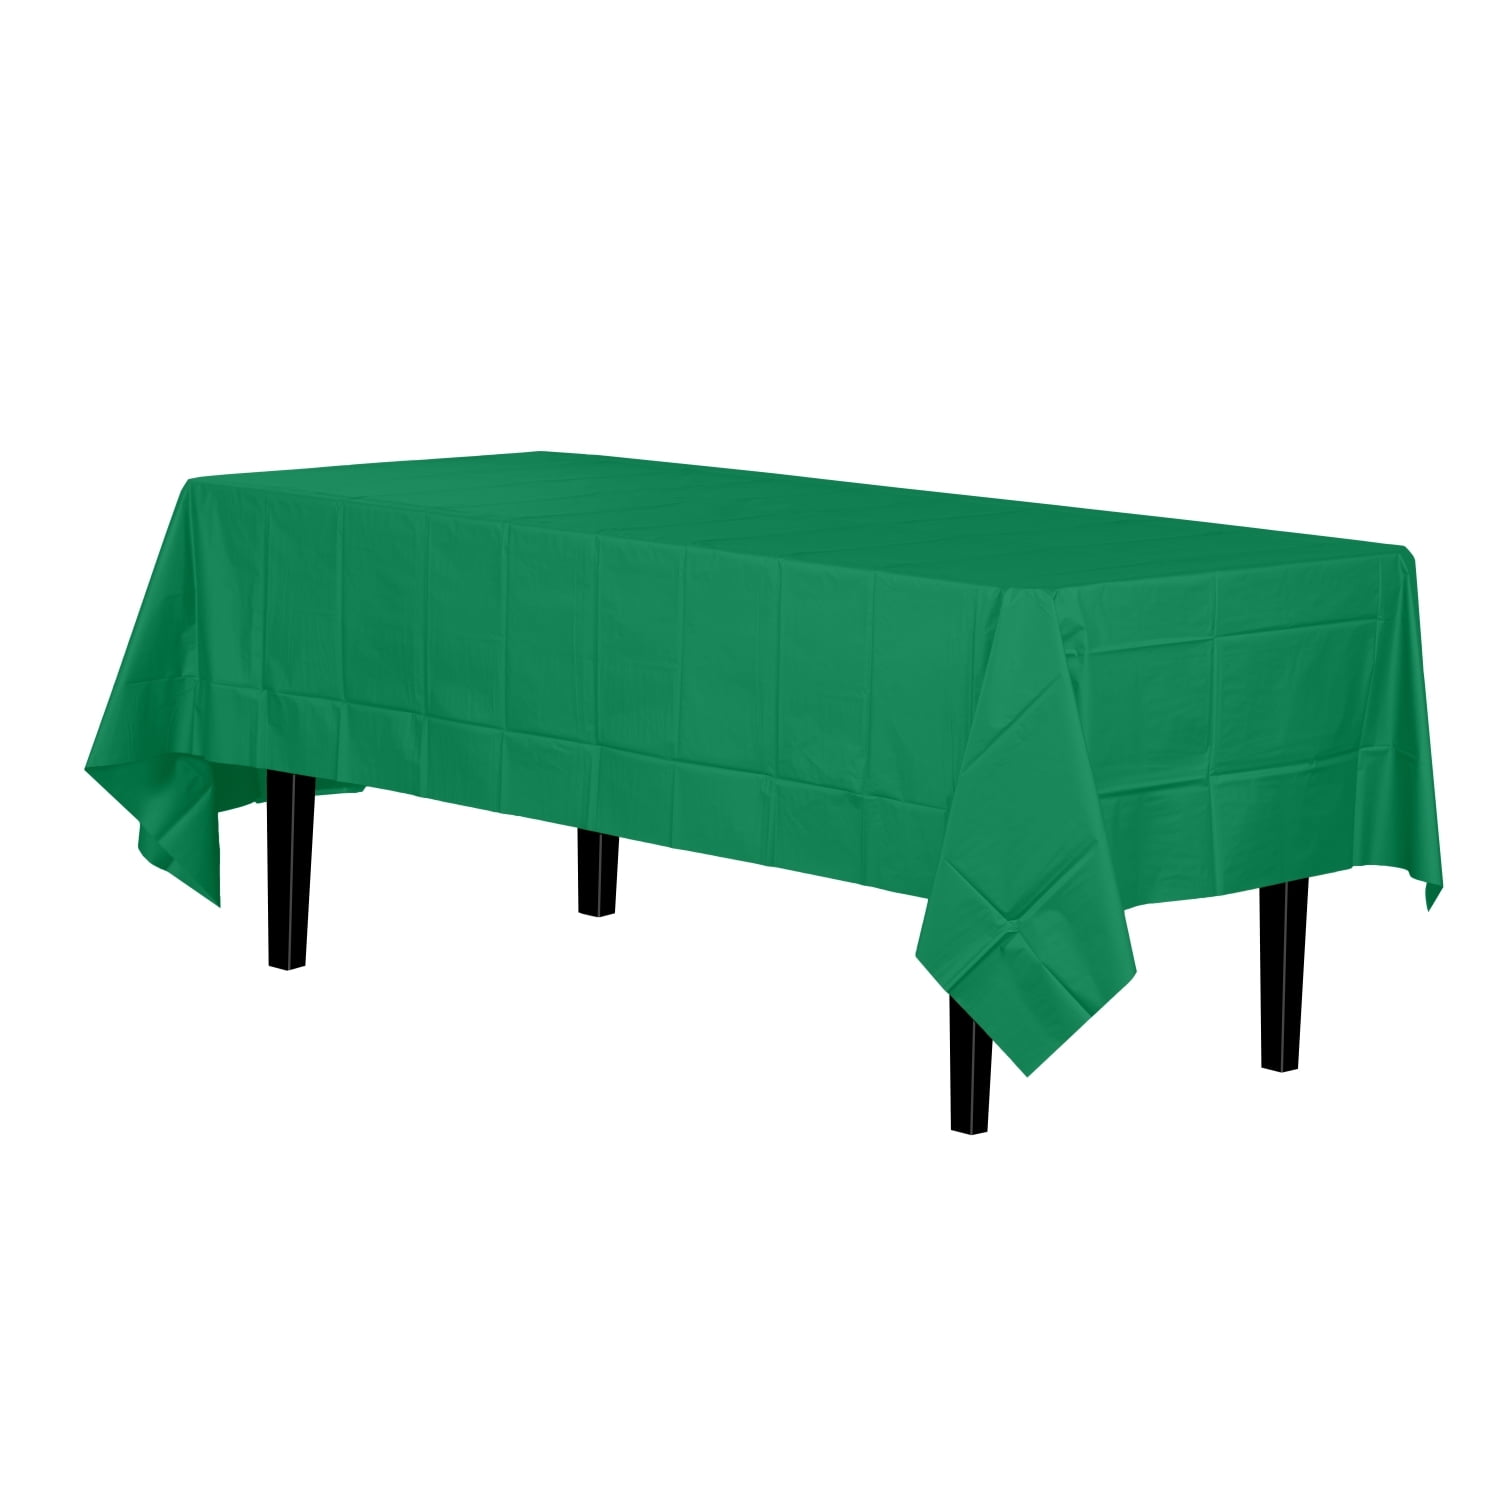 Emerald Green 100FT Plastic Buffet Banquet Roll Wedding Party Table Cover 